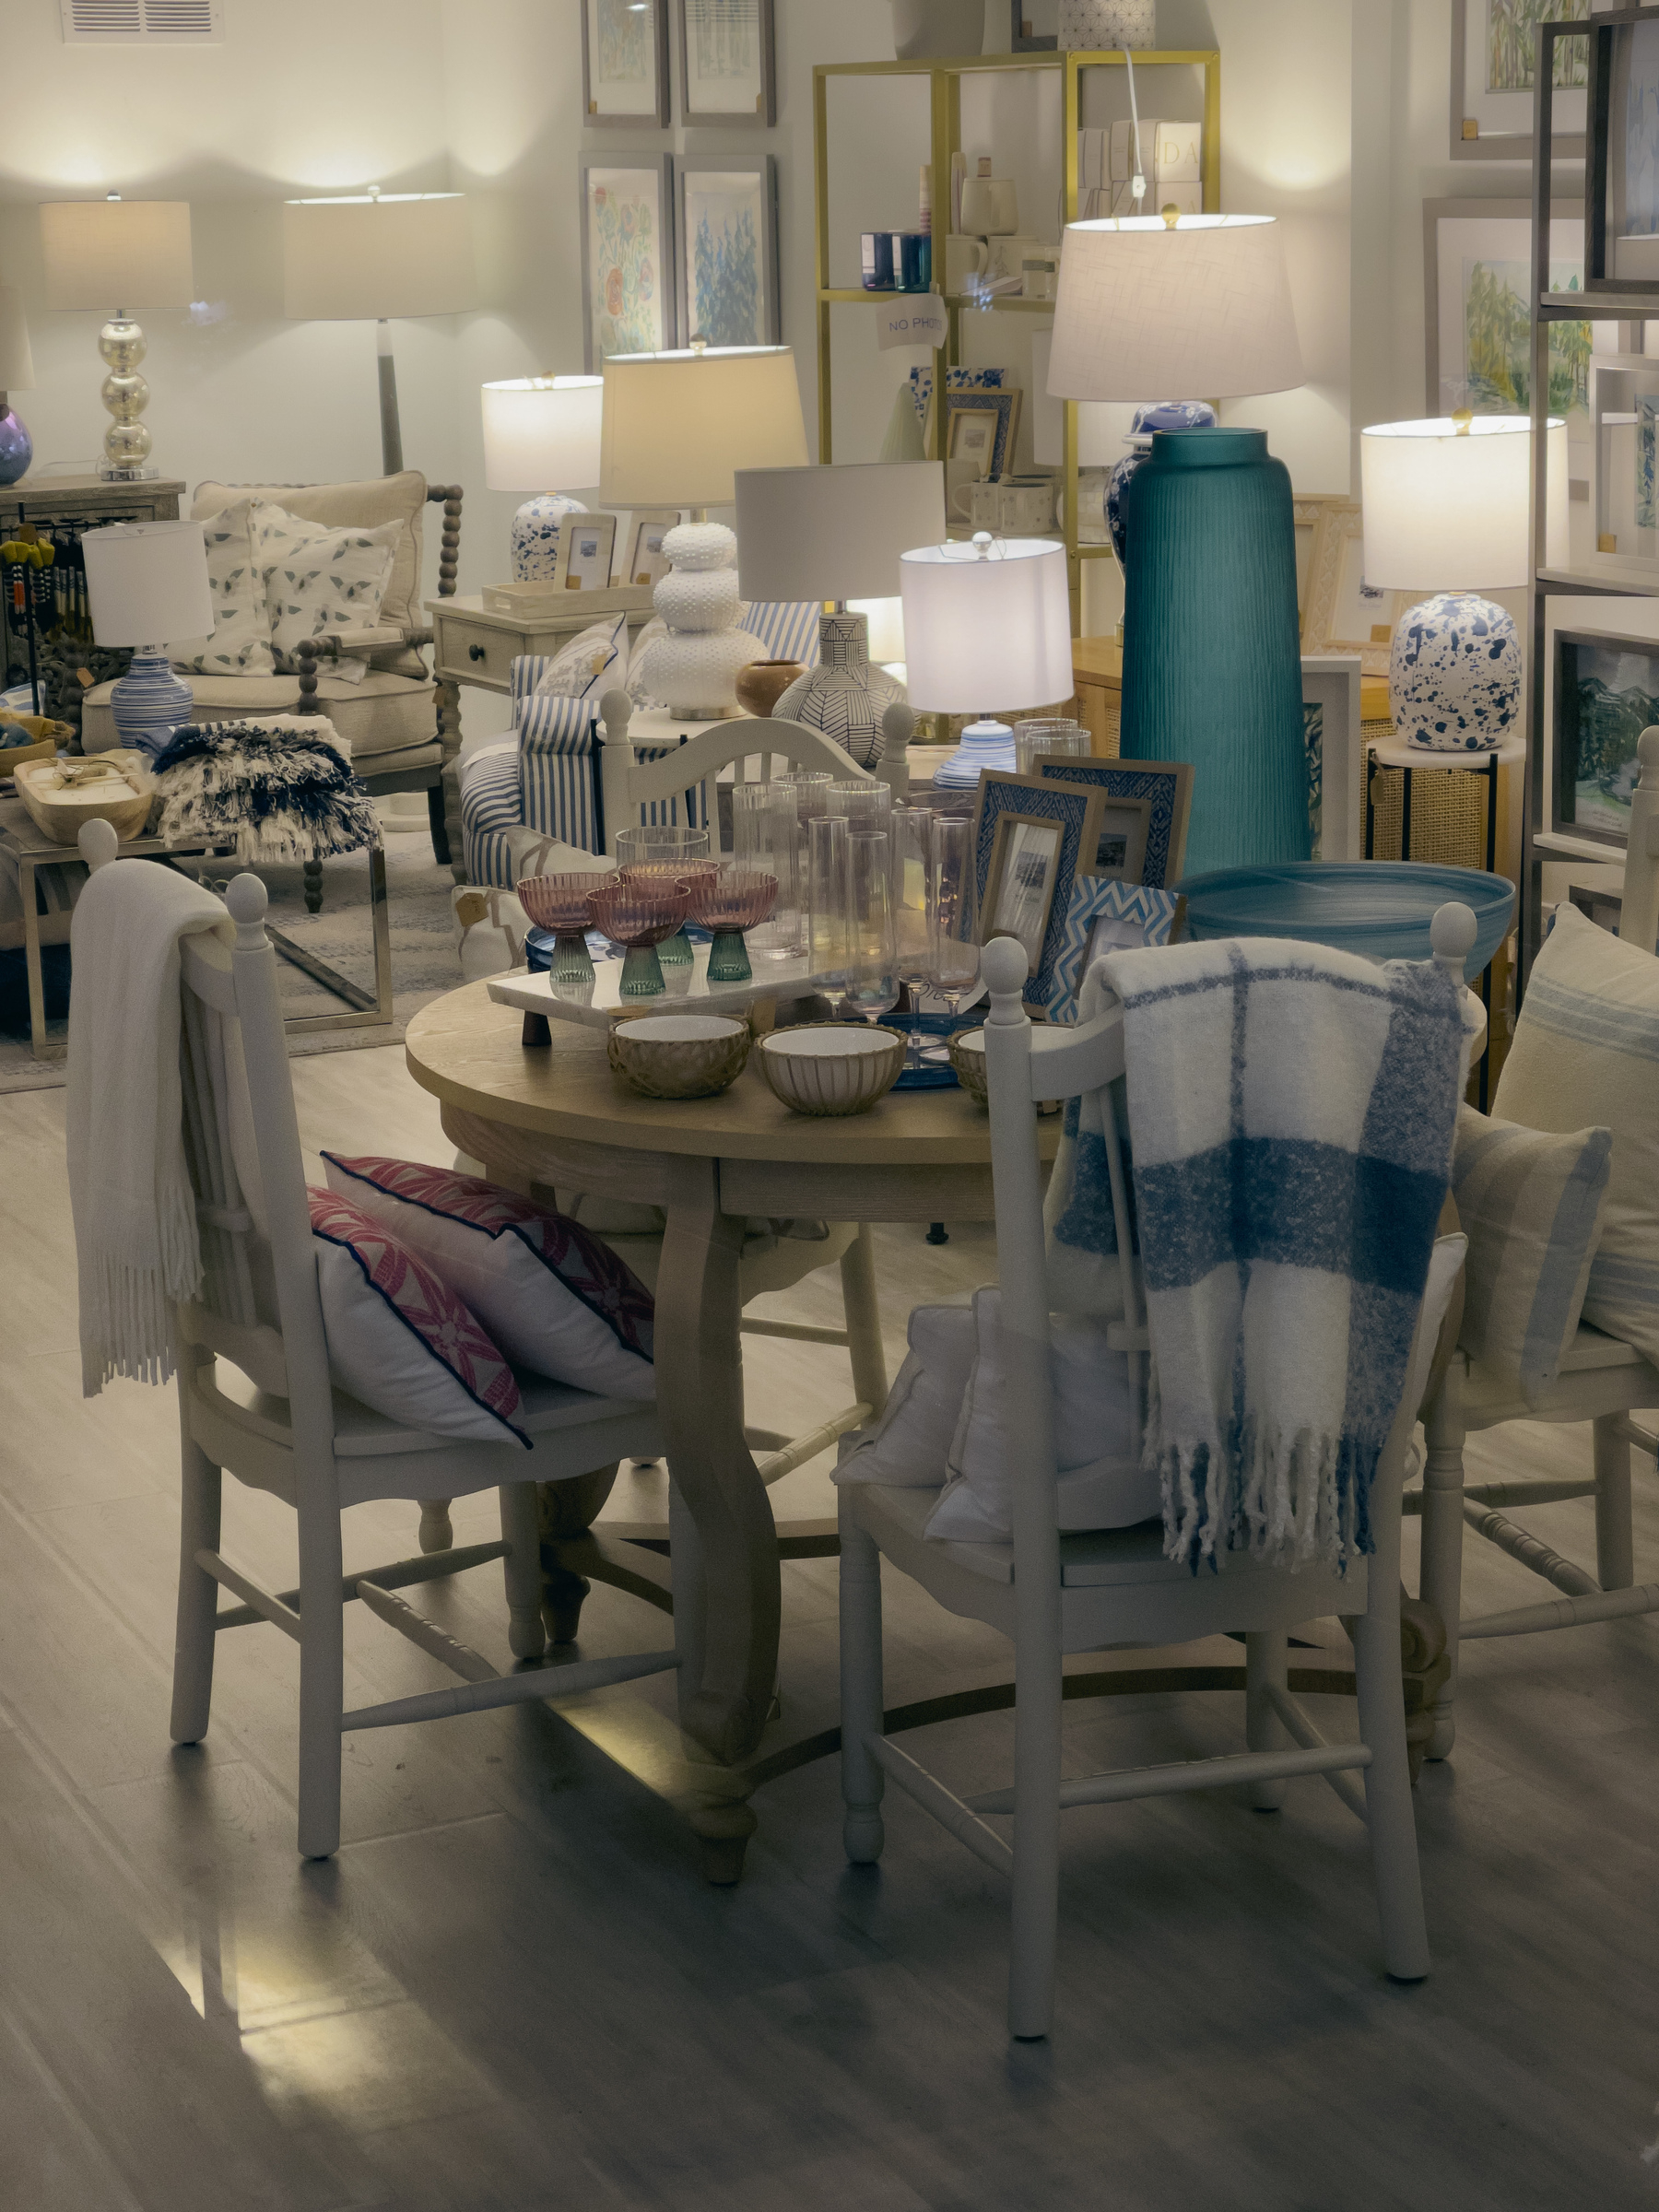 Interior of a home furnishings store, pastel tones dominate, scene lit by a multitude of rable lamps.